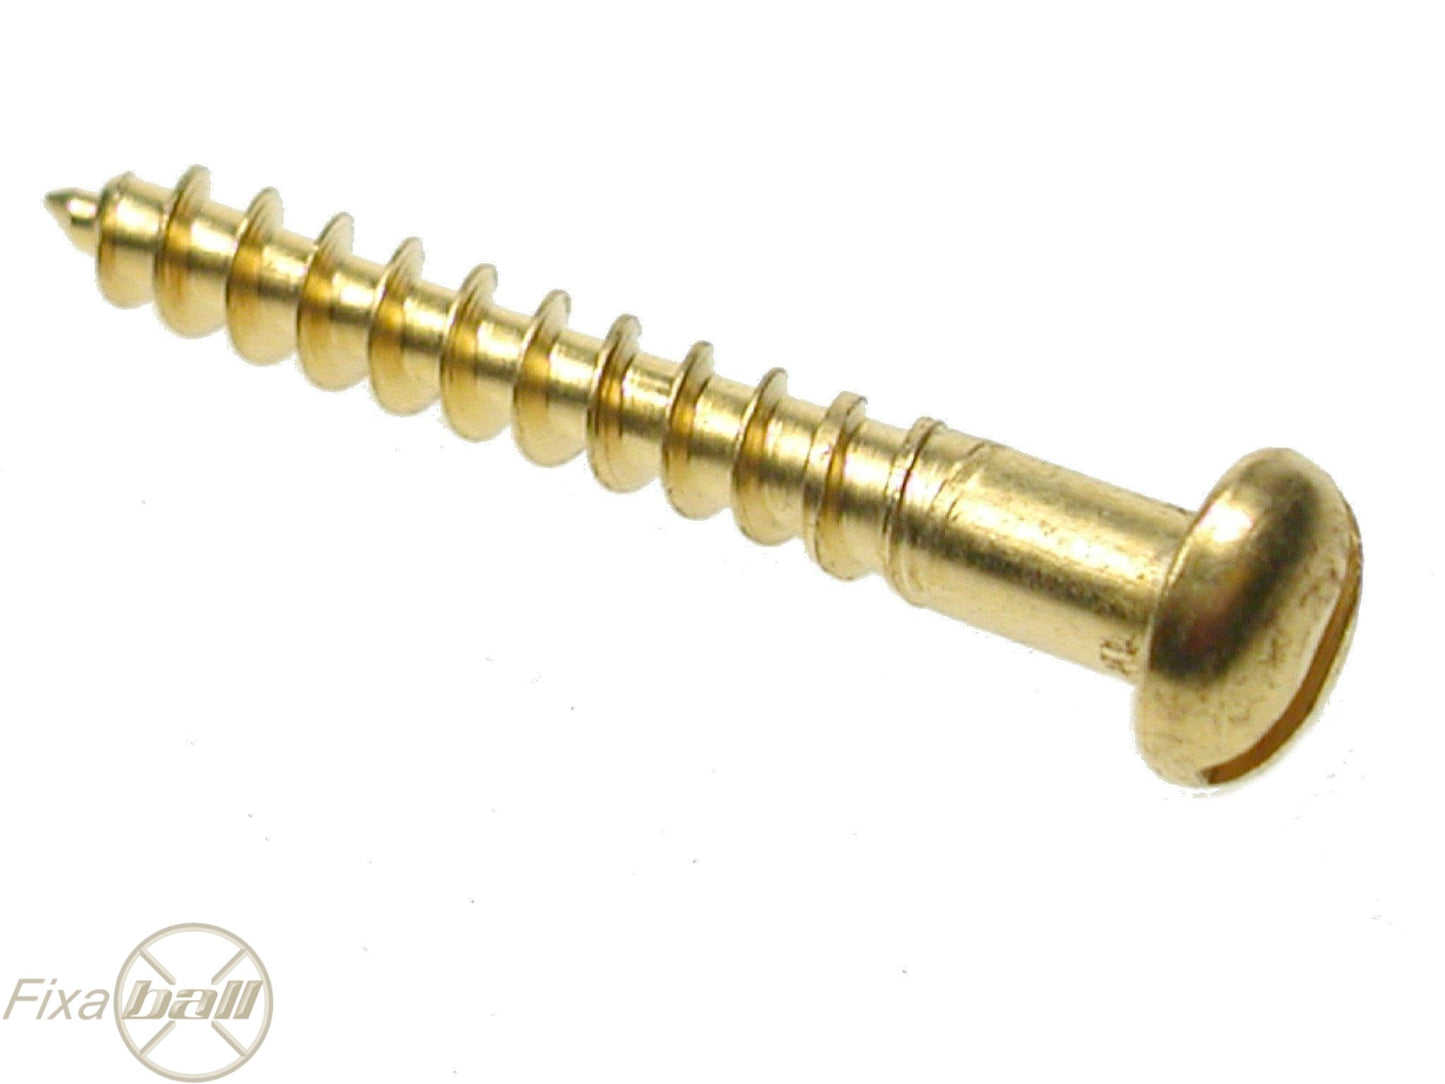 No. 2, Solid Brass, Round, Slotted, Woodscrews Wood Screws No. 2, Solid Brass, Round, Slotted, Woodscrews Brass - Round/ Slotted